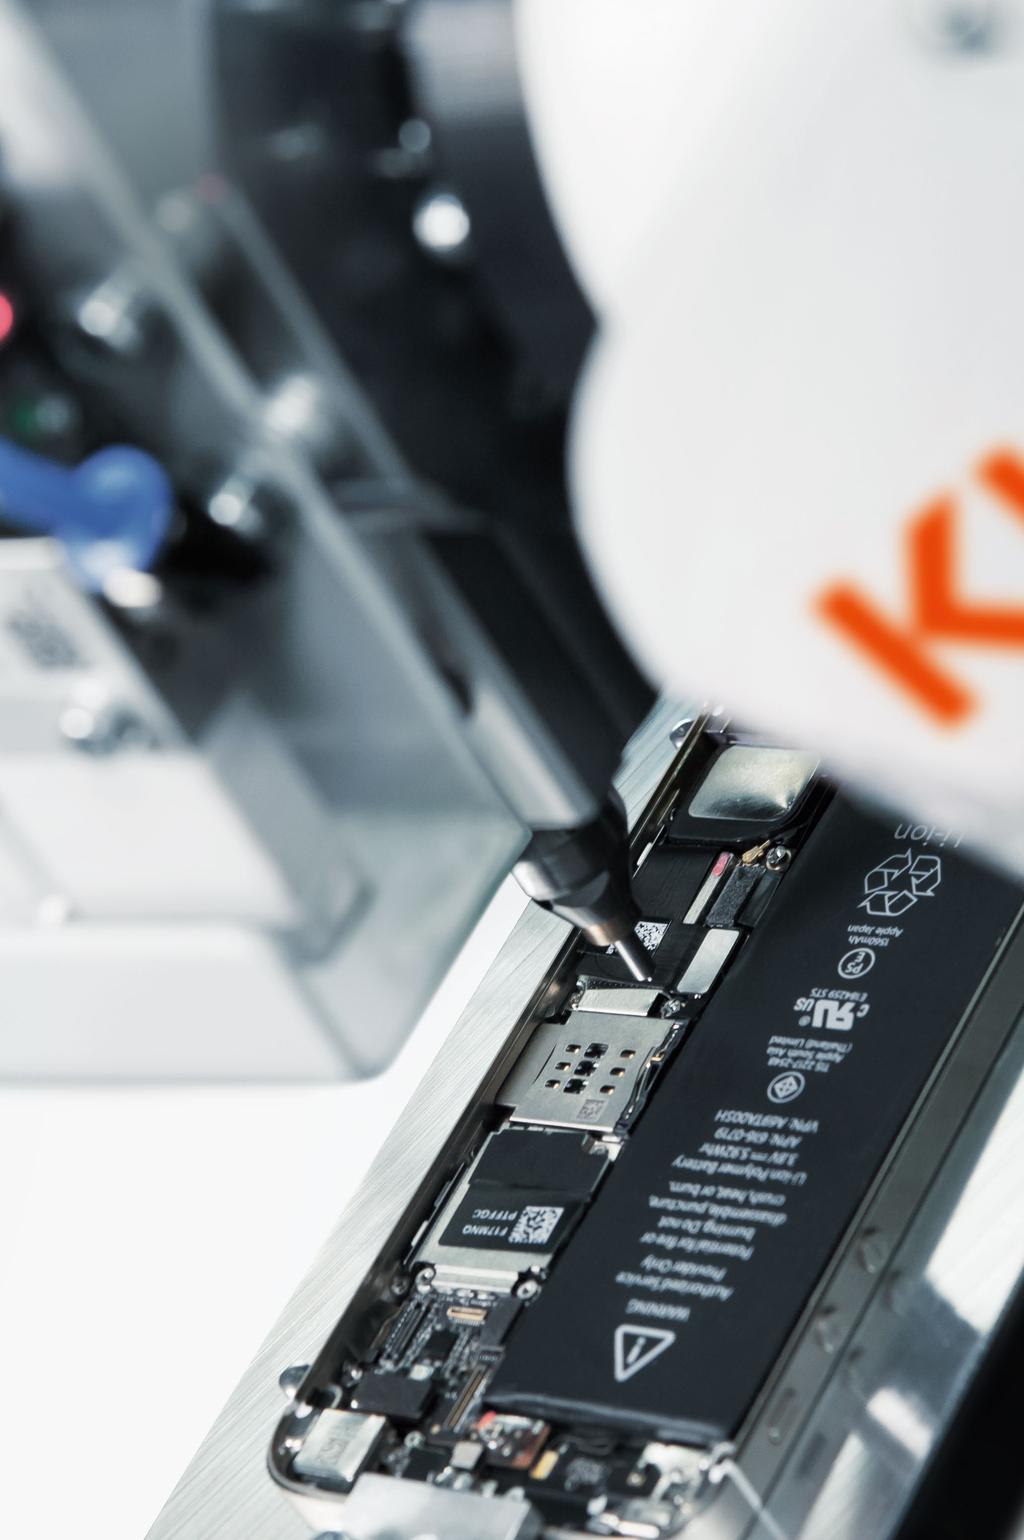 Innovative technology setting the pace Faster and more efficient with KUKA Extreme speed and efficiency Intelligent displays, high-performance semiconductors, wireless communication the rapid